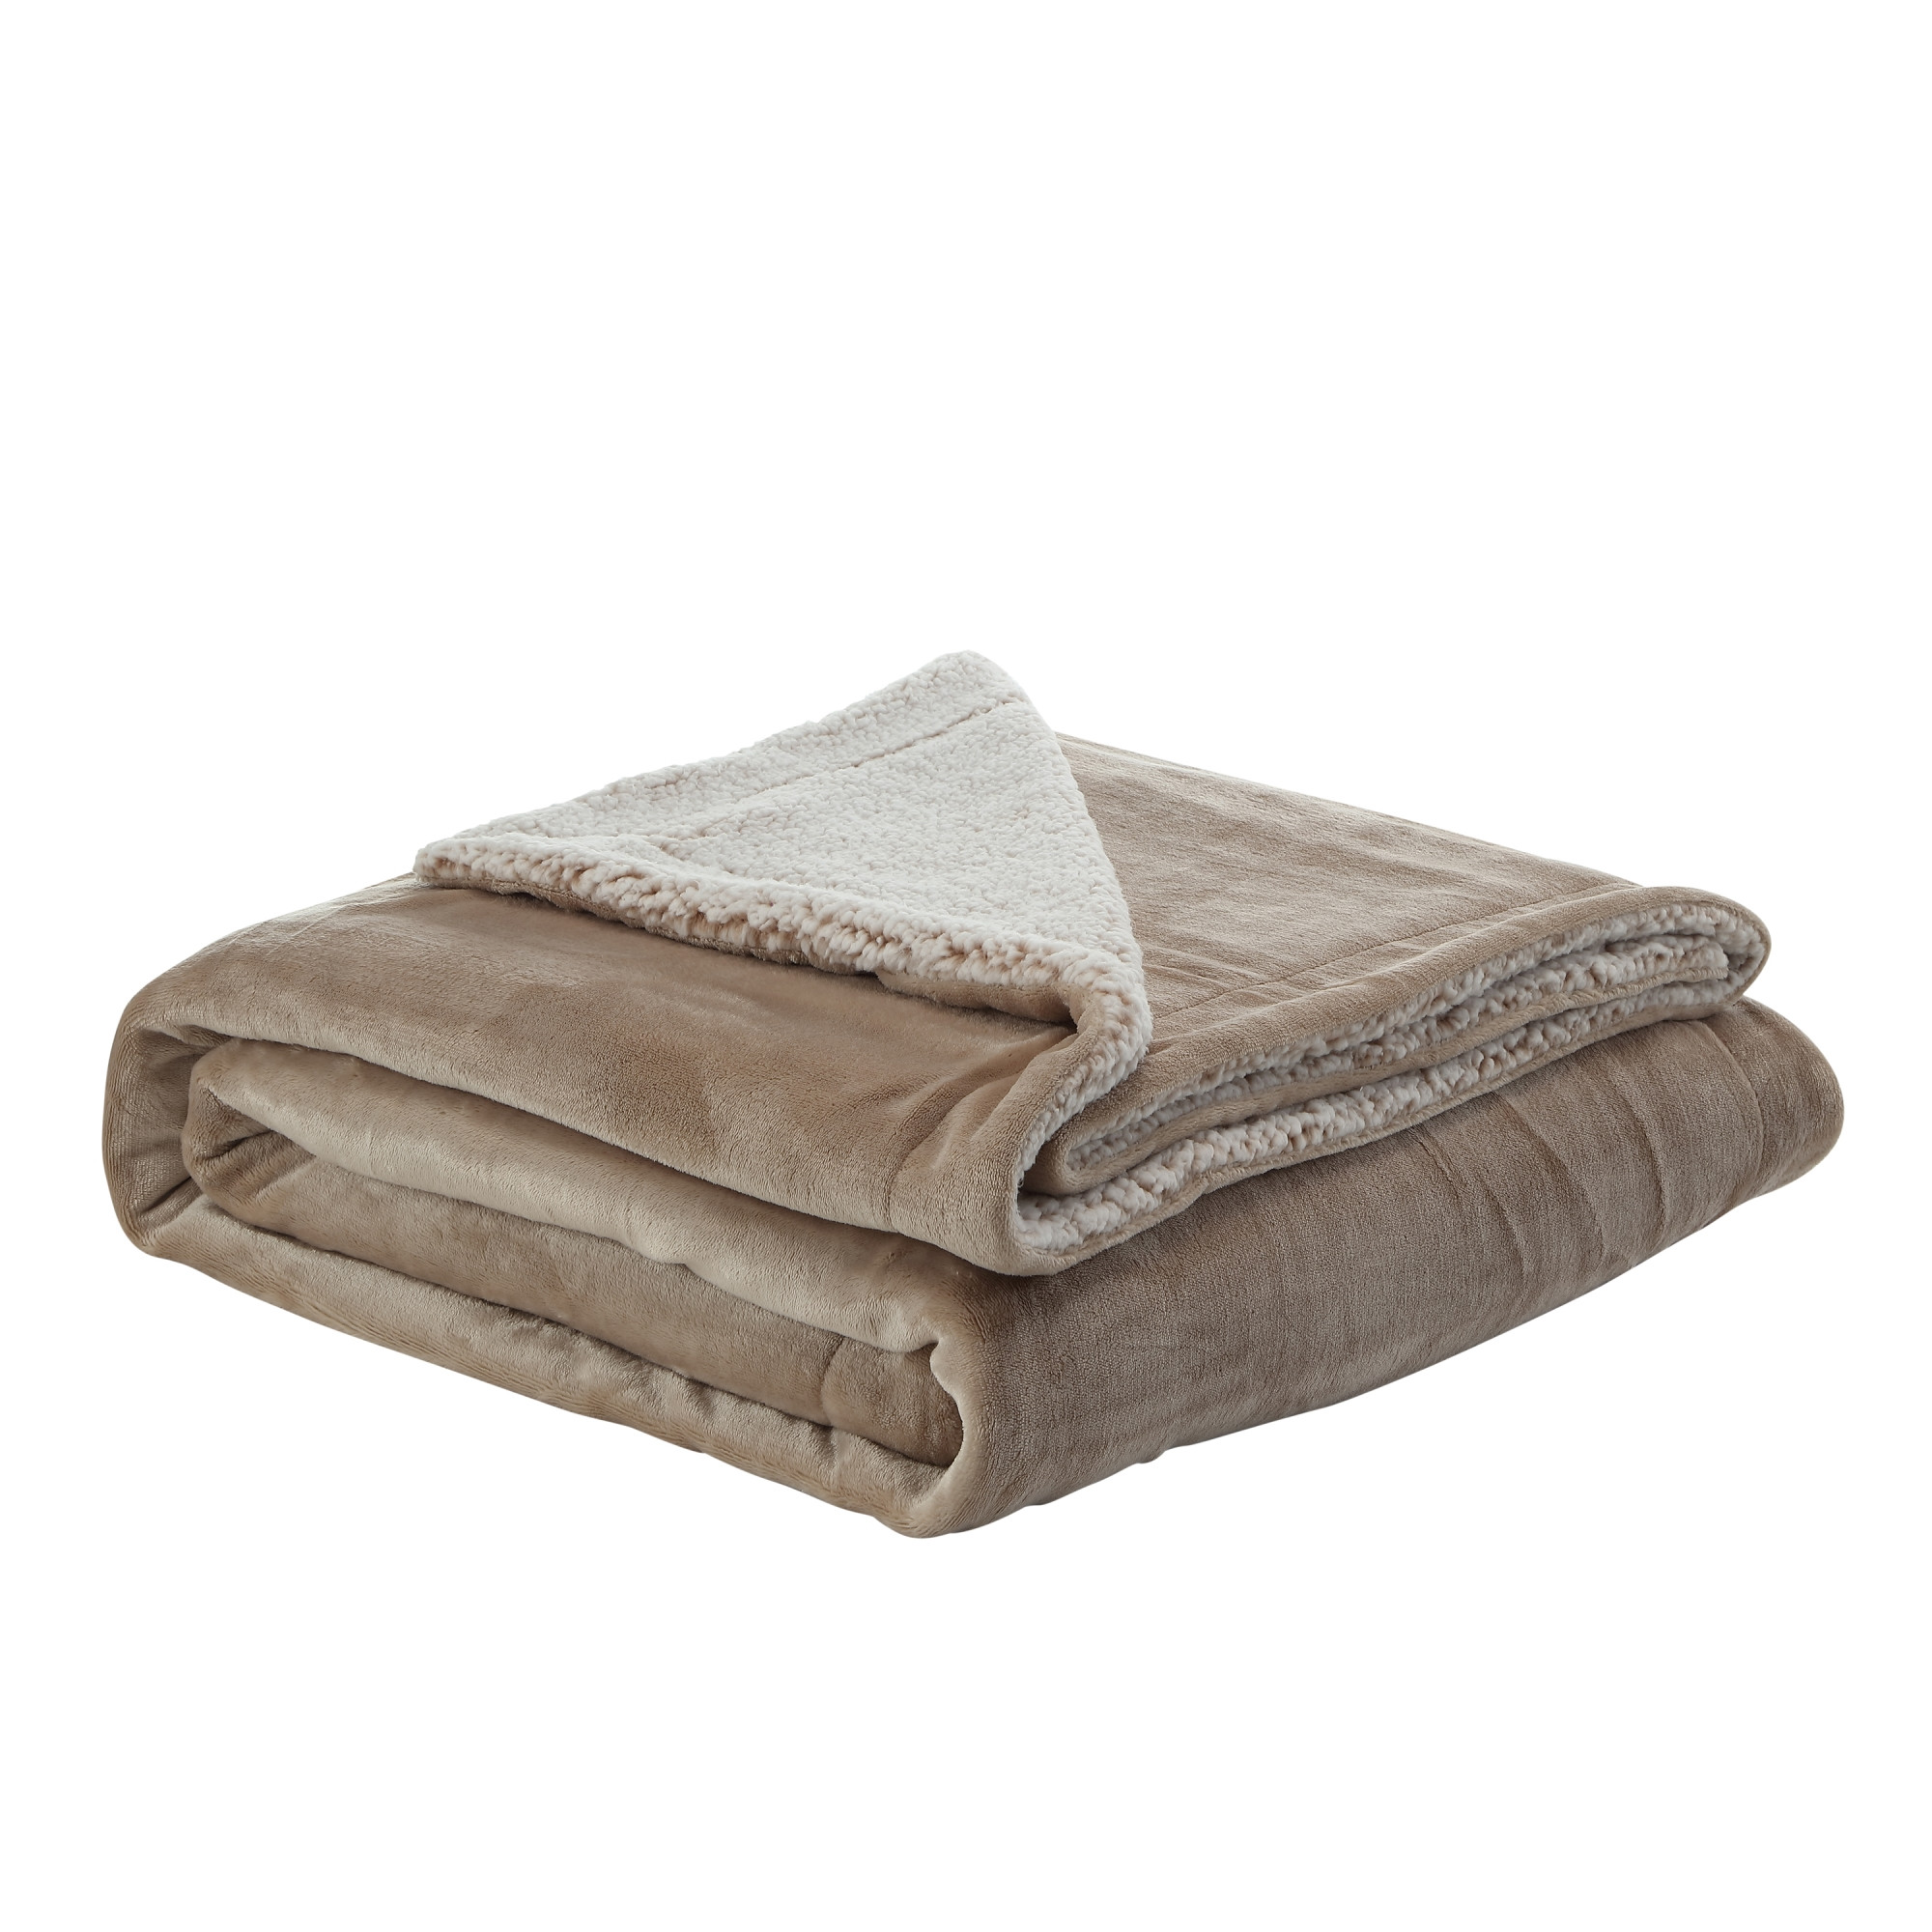 Taupe Knitted PolYester Solid Color Plush Queen Blanket-531206-1